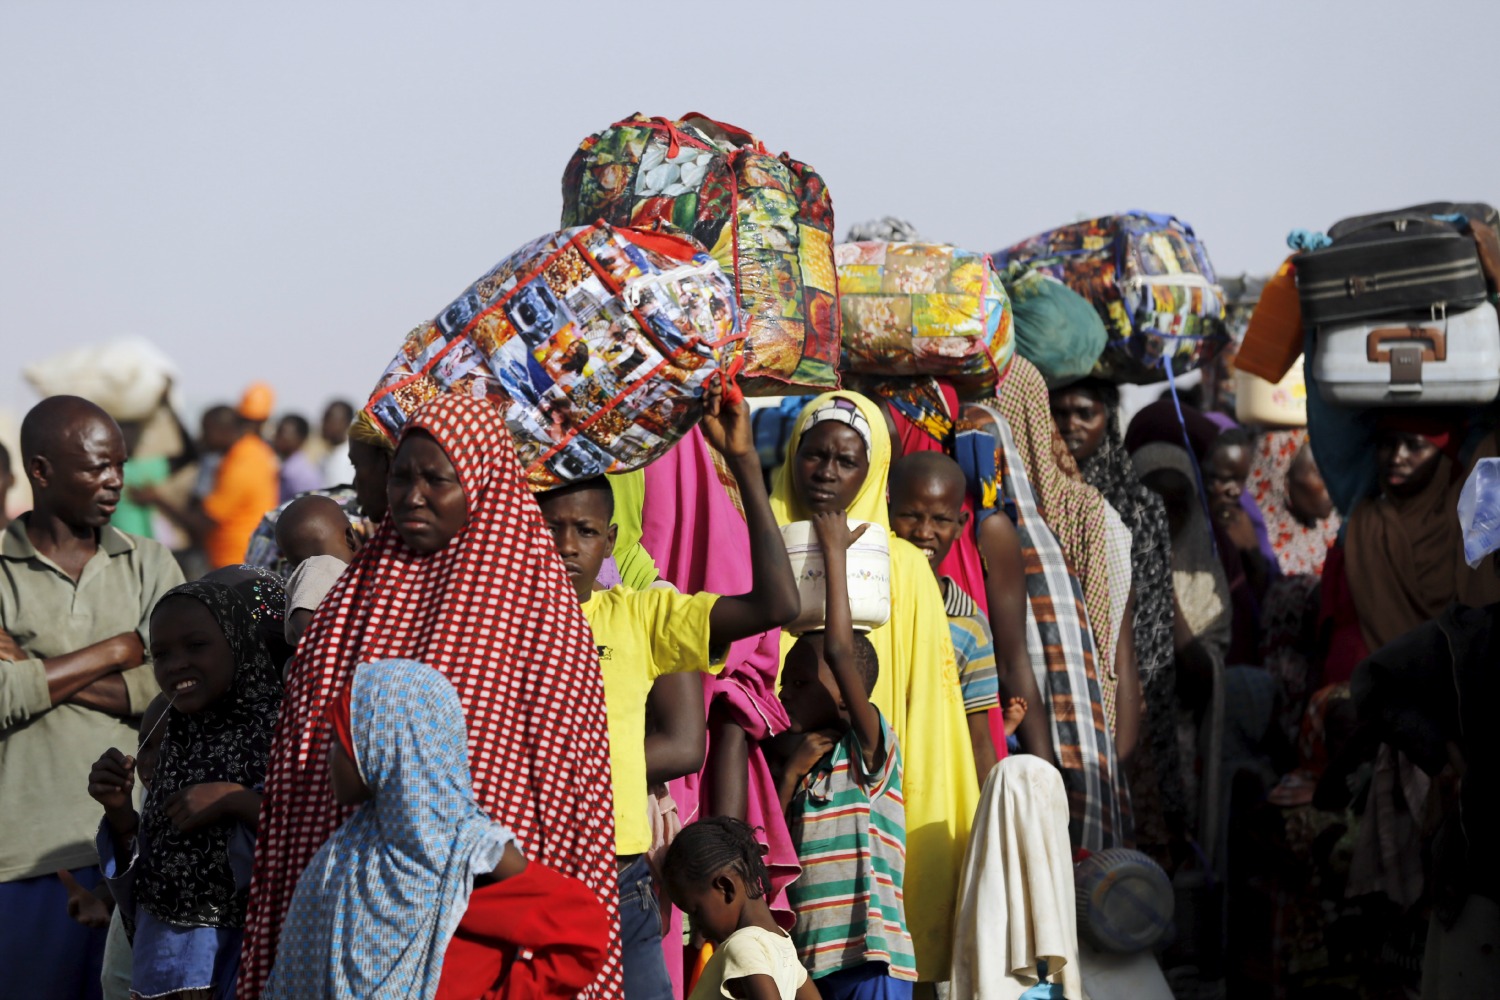 Chad declares state of emergency following Boko Haram attacks